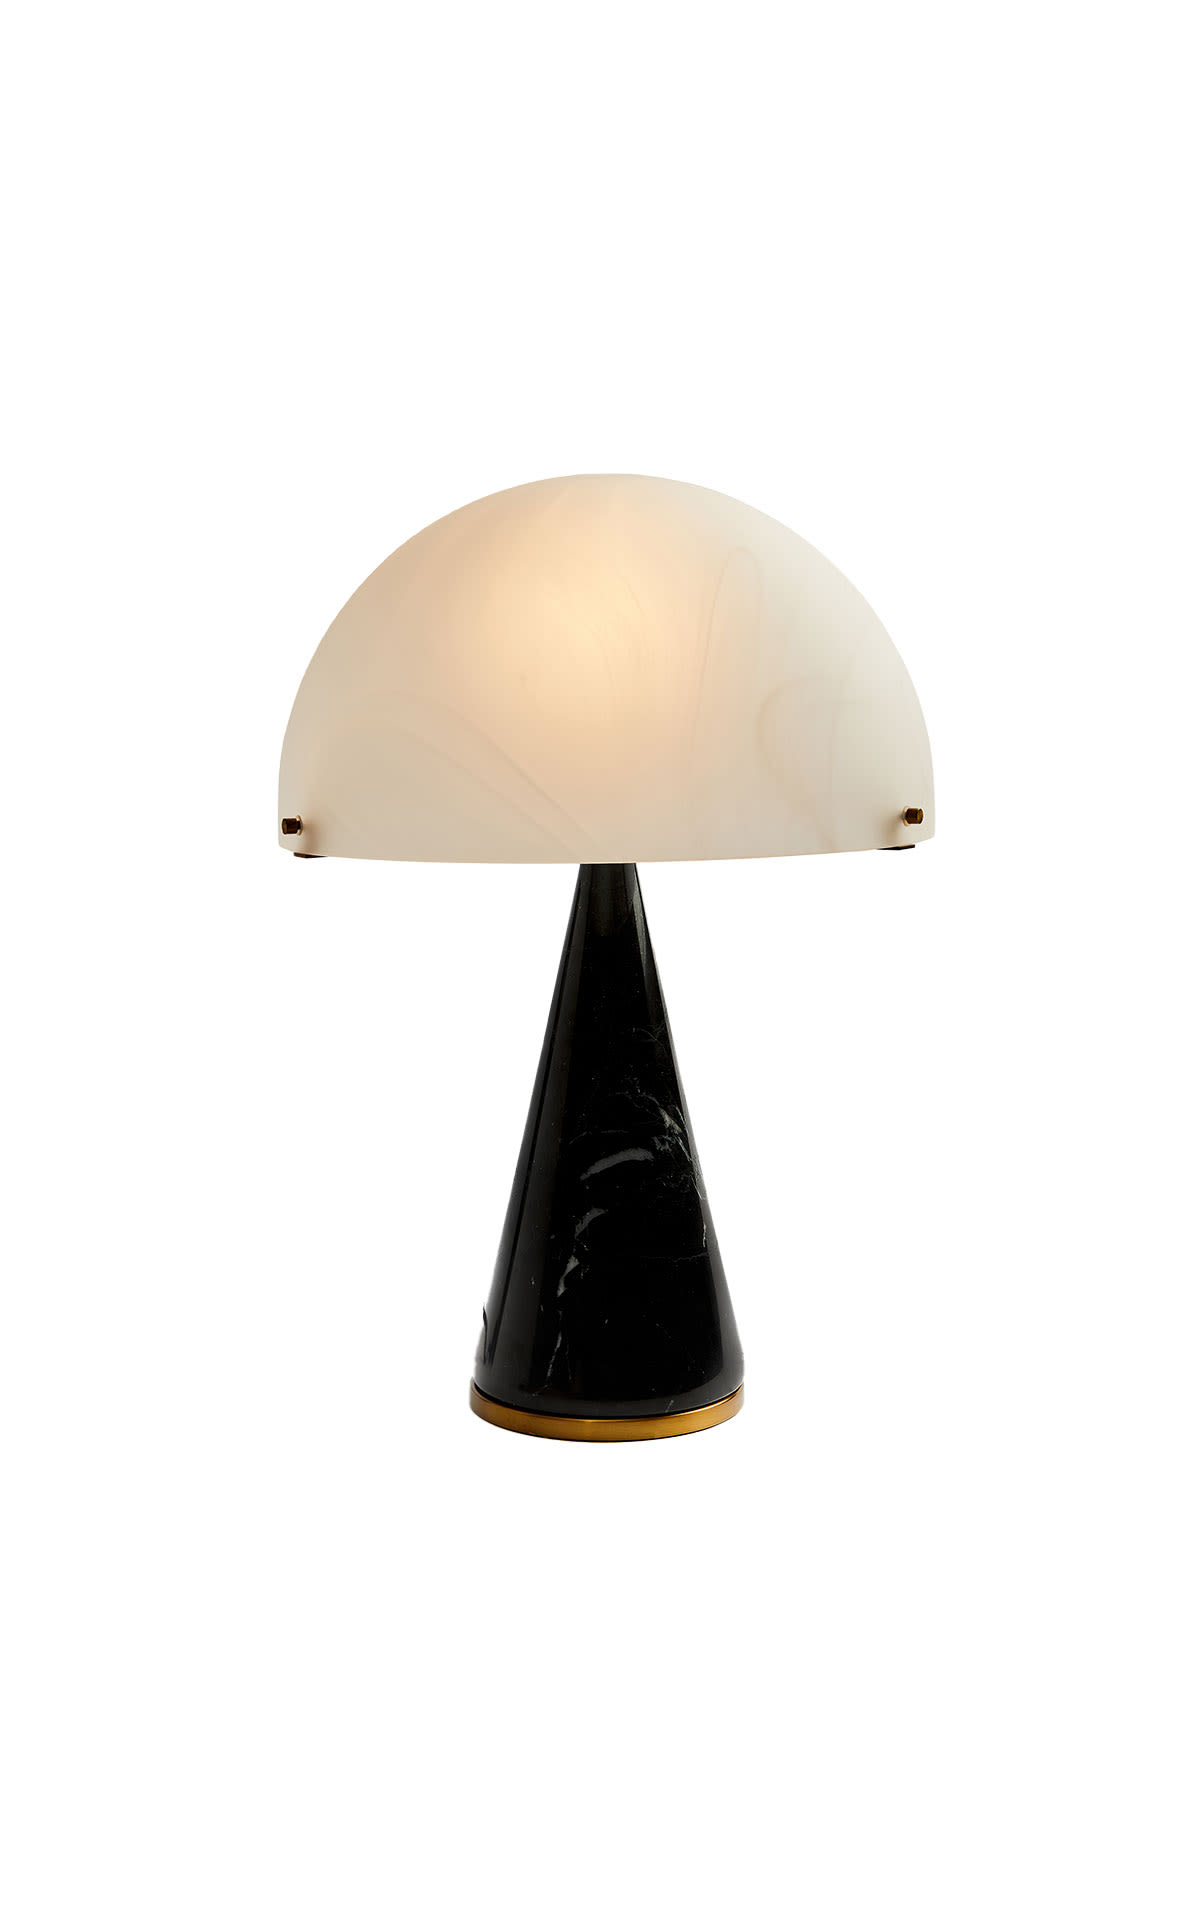 Soho Home Nolan table lamp from Bicester Village